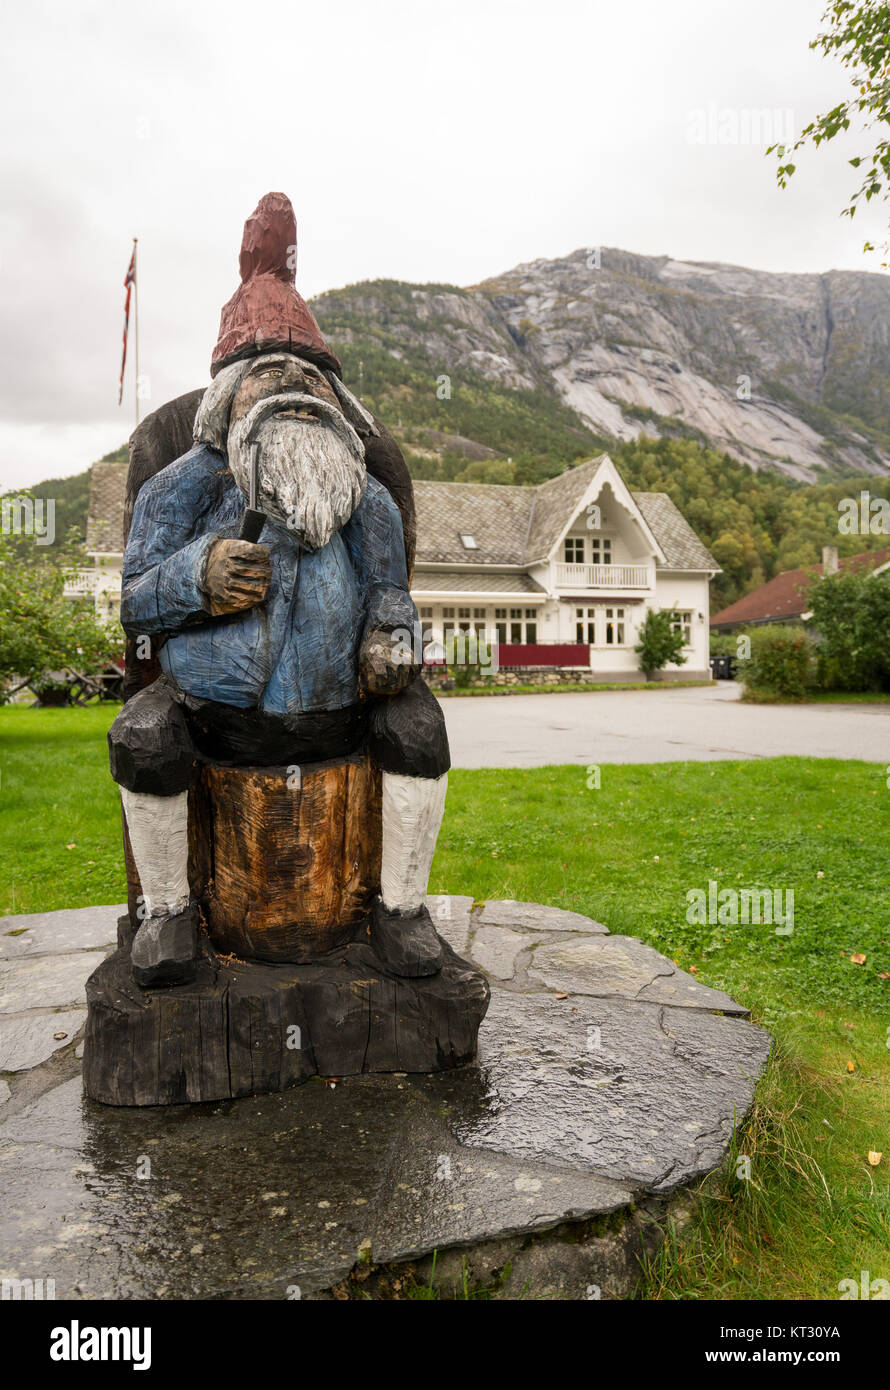 Statue of the Troll in Eidfjord Norway Stock Photo